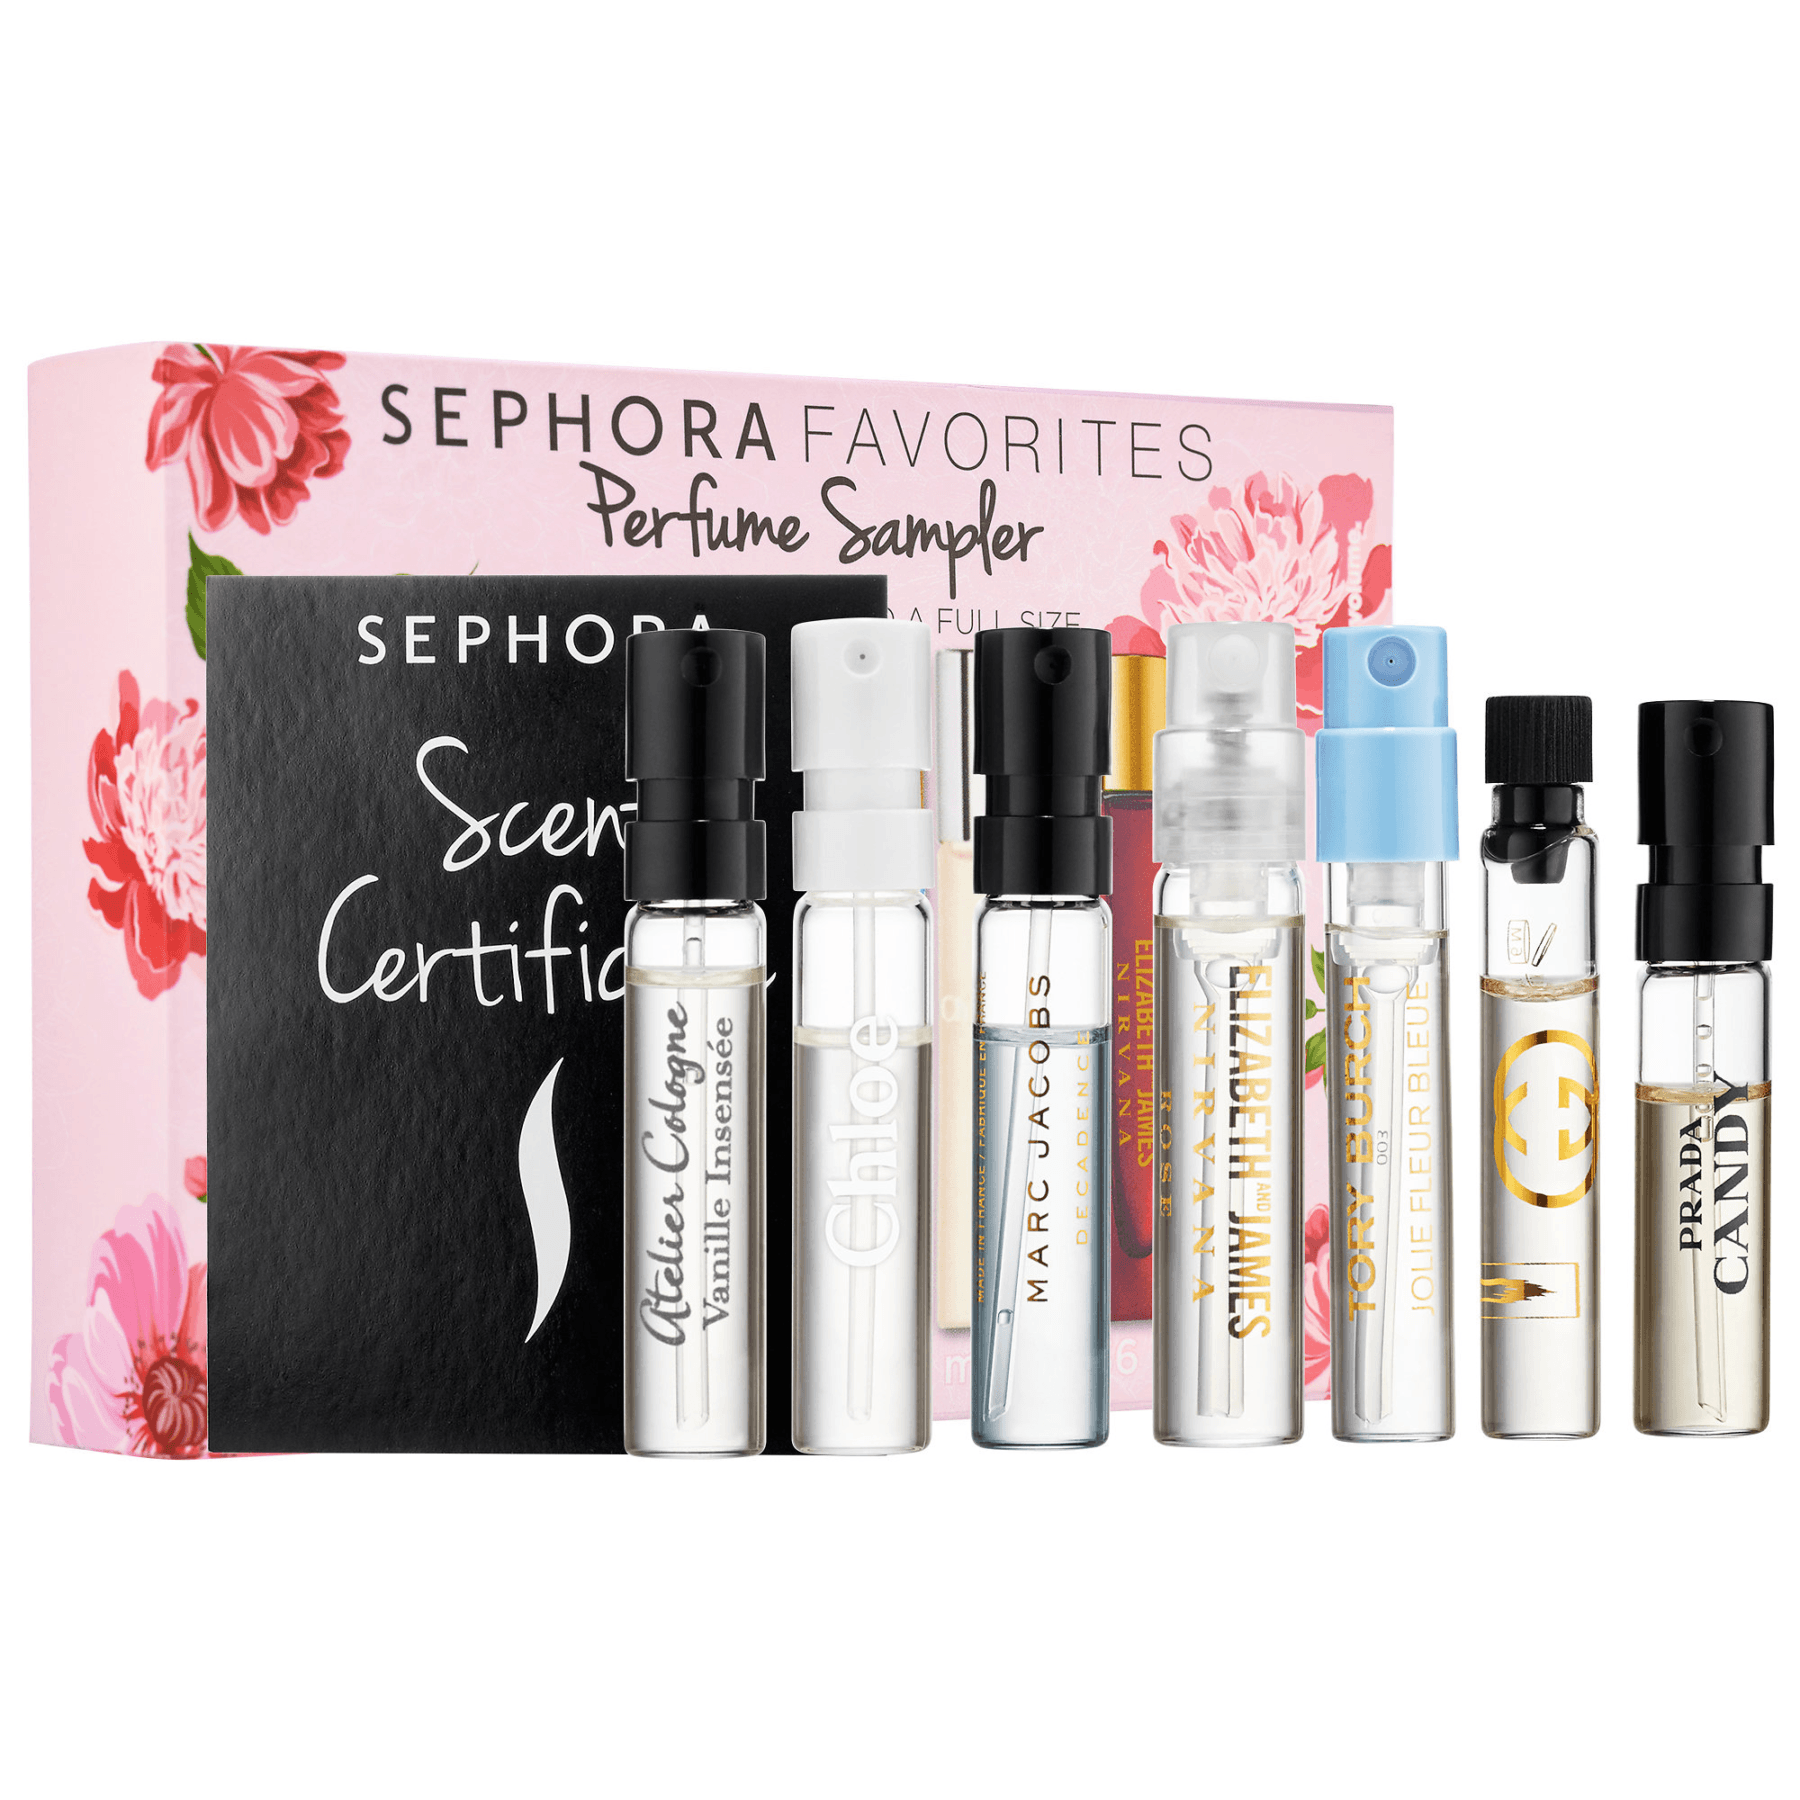 Sephora Favorites Perfume Travel Sampler Available Now + Coupons ...